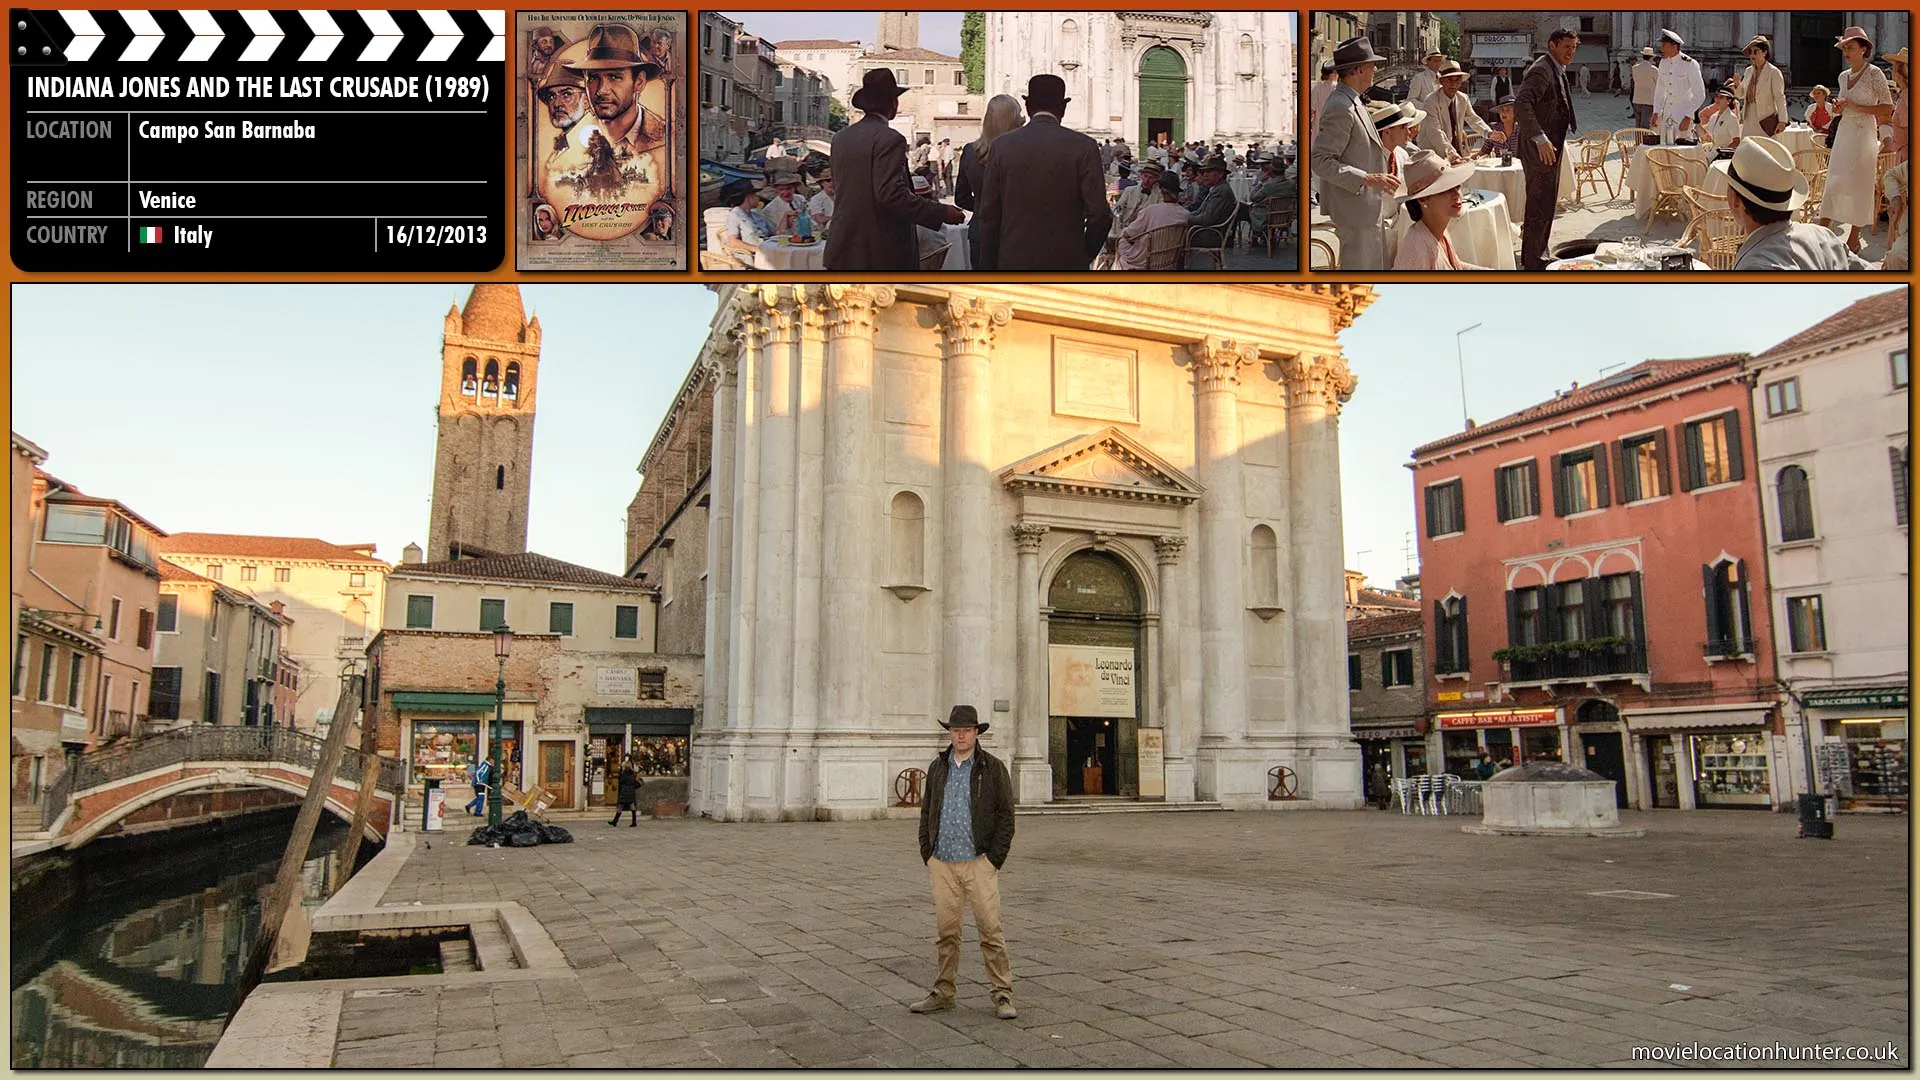 Filming location photo, shot in Italy, for Indiana Jones and the Last Crusade (1989). Scene description: Indy (Harrison Ford), Marcus (Denholm Elliott) and Elsa (Alison Doody) goes to where Henry (Sean Connery) disappeared, the Venice library, which was once a church in ancient Roman times. A stained-glass window dating from the sacking of Byzantium gives Indy a clue that the library is the tomb of the knight. Indy pries open the floor and finds a network of tunnels containing oil. Exploring the tunnel with Elsa - and in the process passing a wall painting of ancient antiquities such as The Ark of The Covenant - Indy finds an ancient casket and a knight's shield, the second marker.